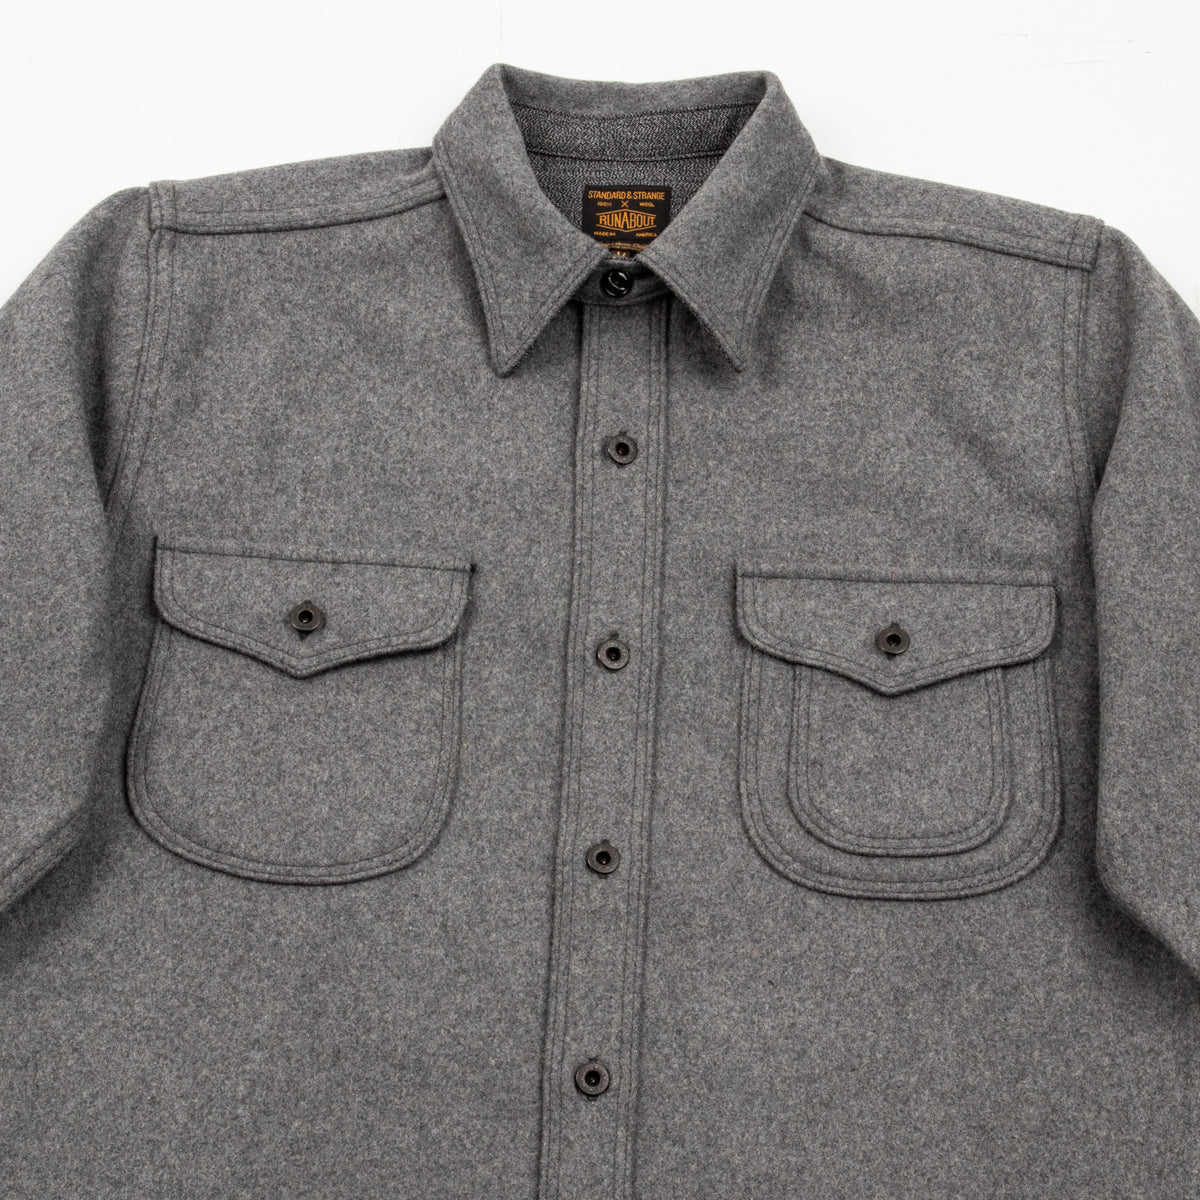 S&S x Runabout Goods Wool CPO Shirt